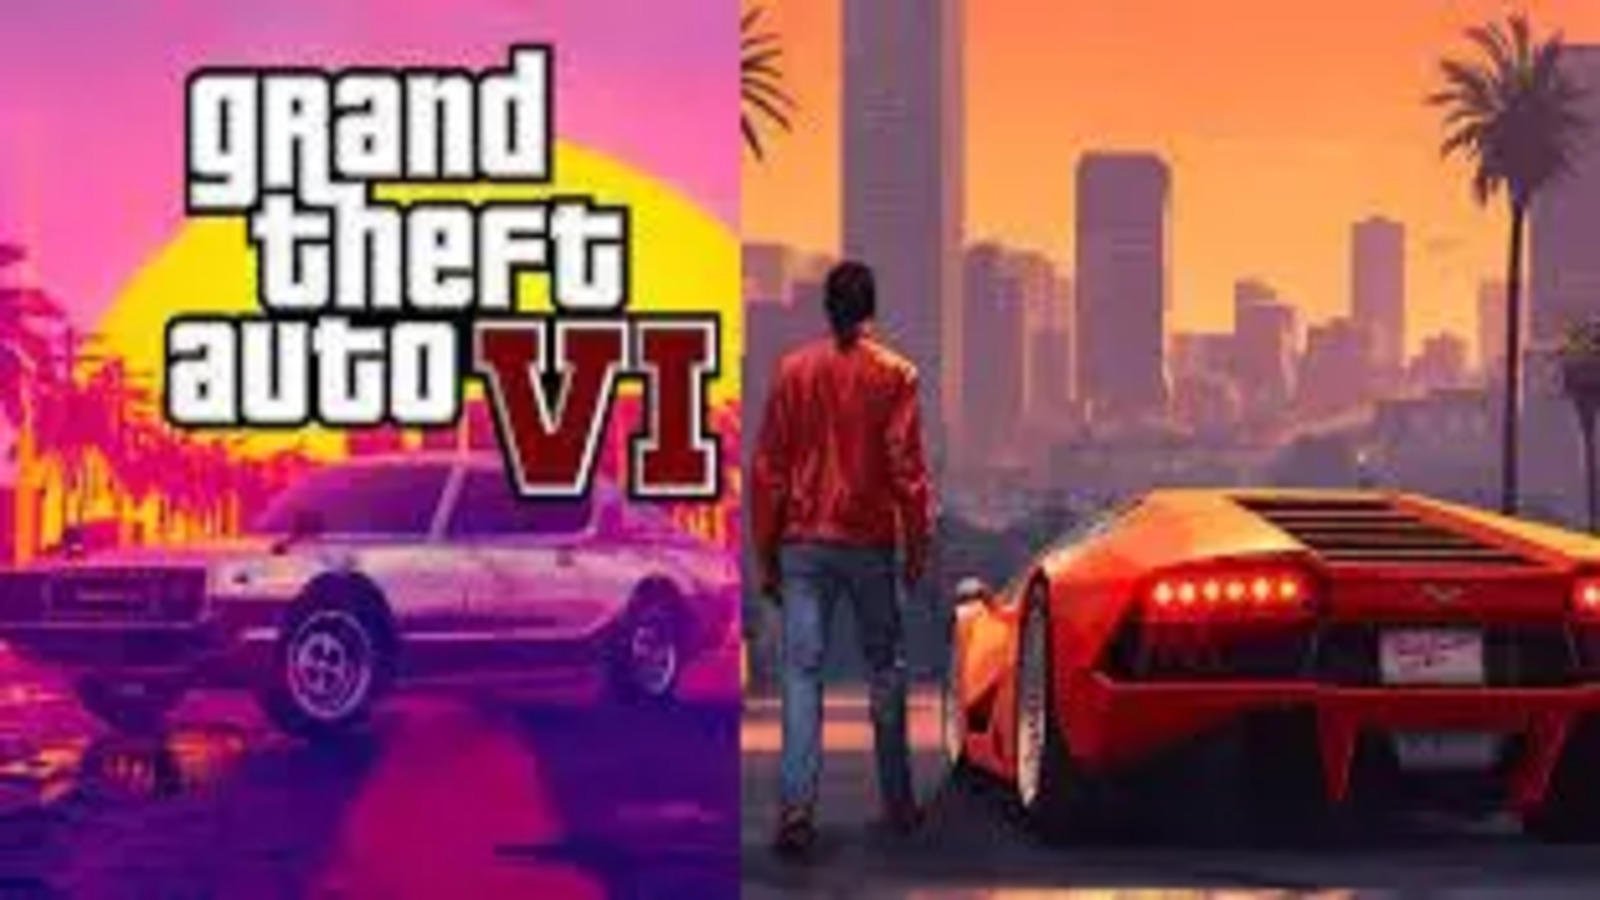 gta 6 release date grand theft auto vi trailer to be released in december experts make big claims